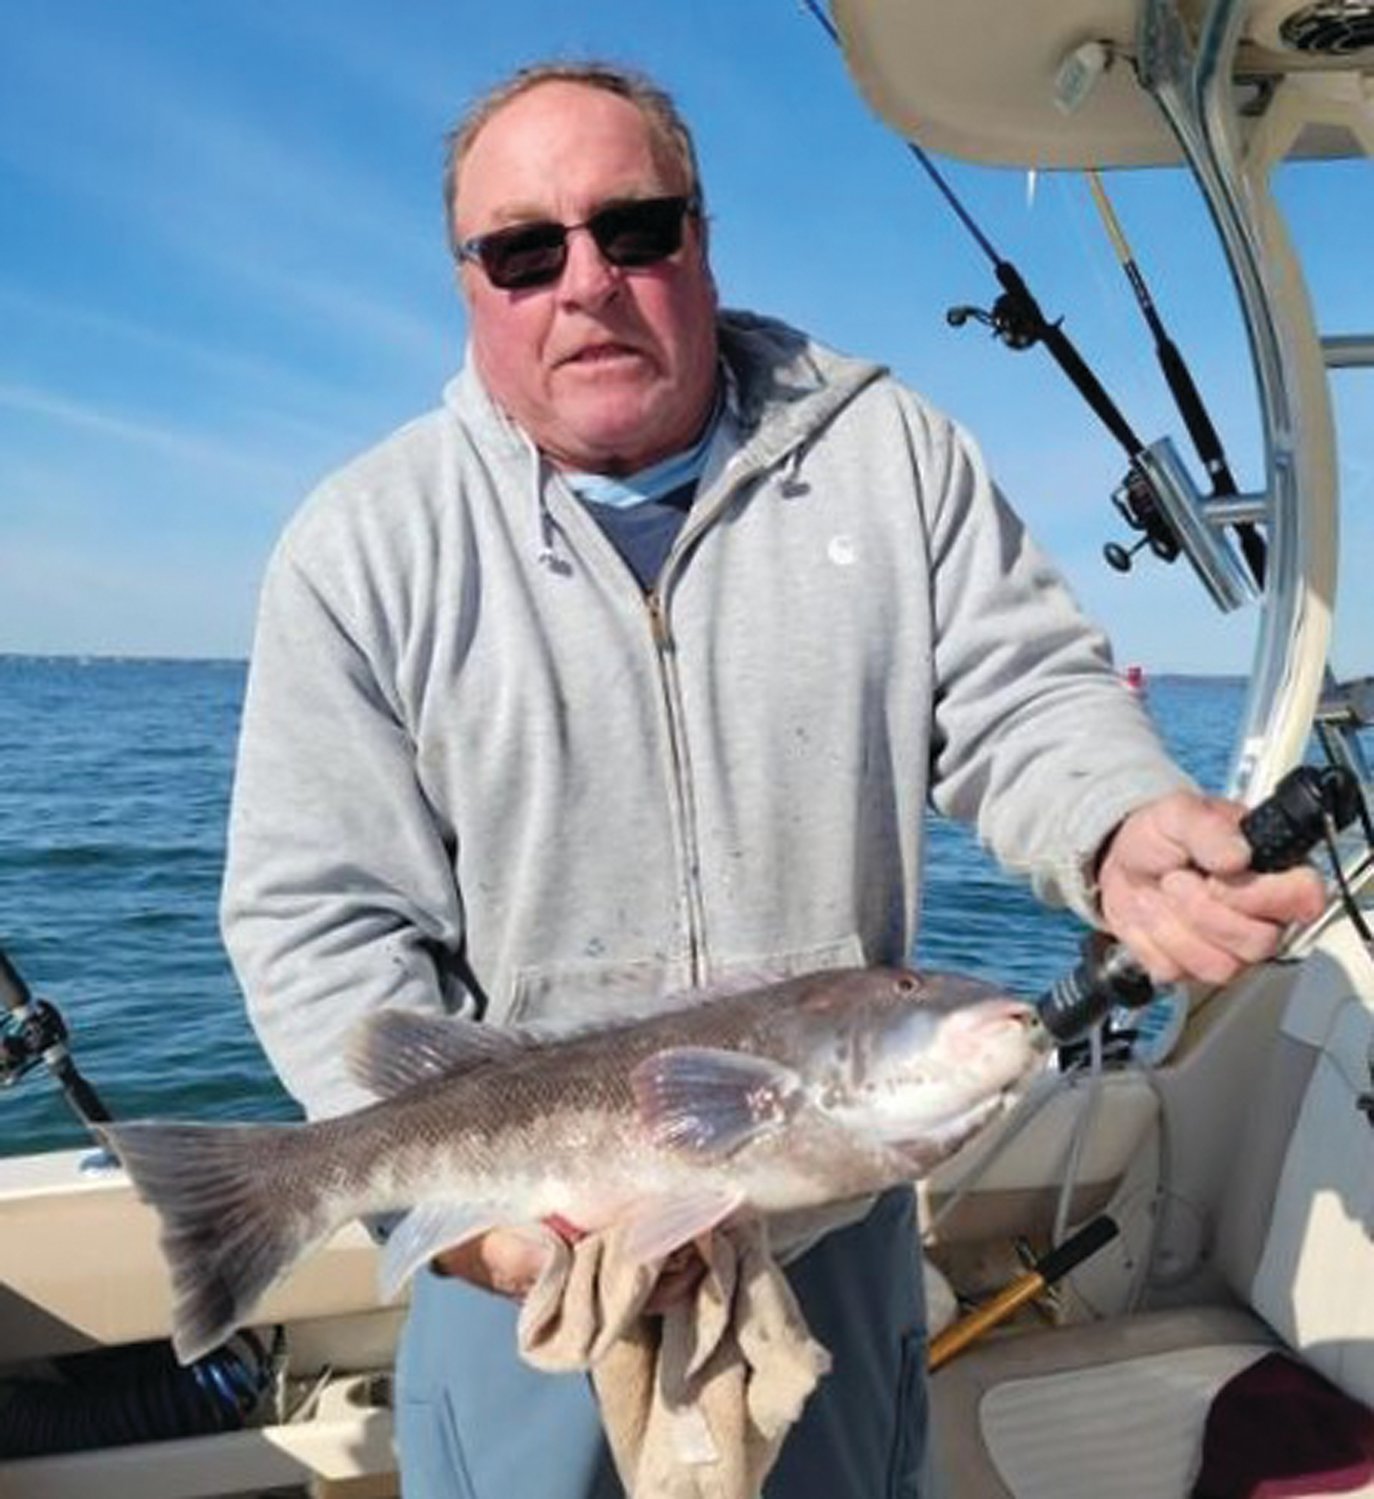 TAUTOG BITE: Kevin Harrington of Portsmouth, RI with the 24-inch, 8.3-pound tautog he caught last week fishing at the mouth of the Sakonnet River with Greg Spier.